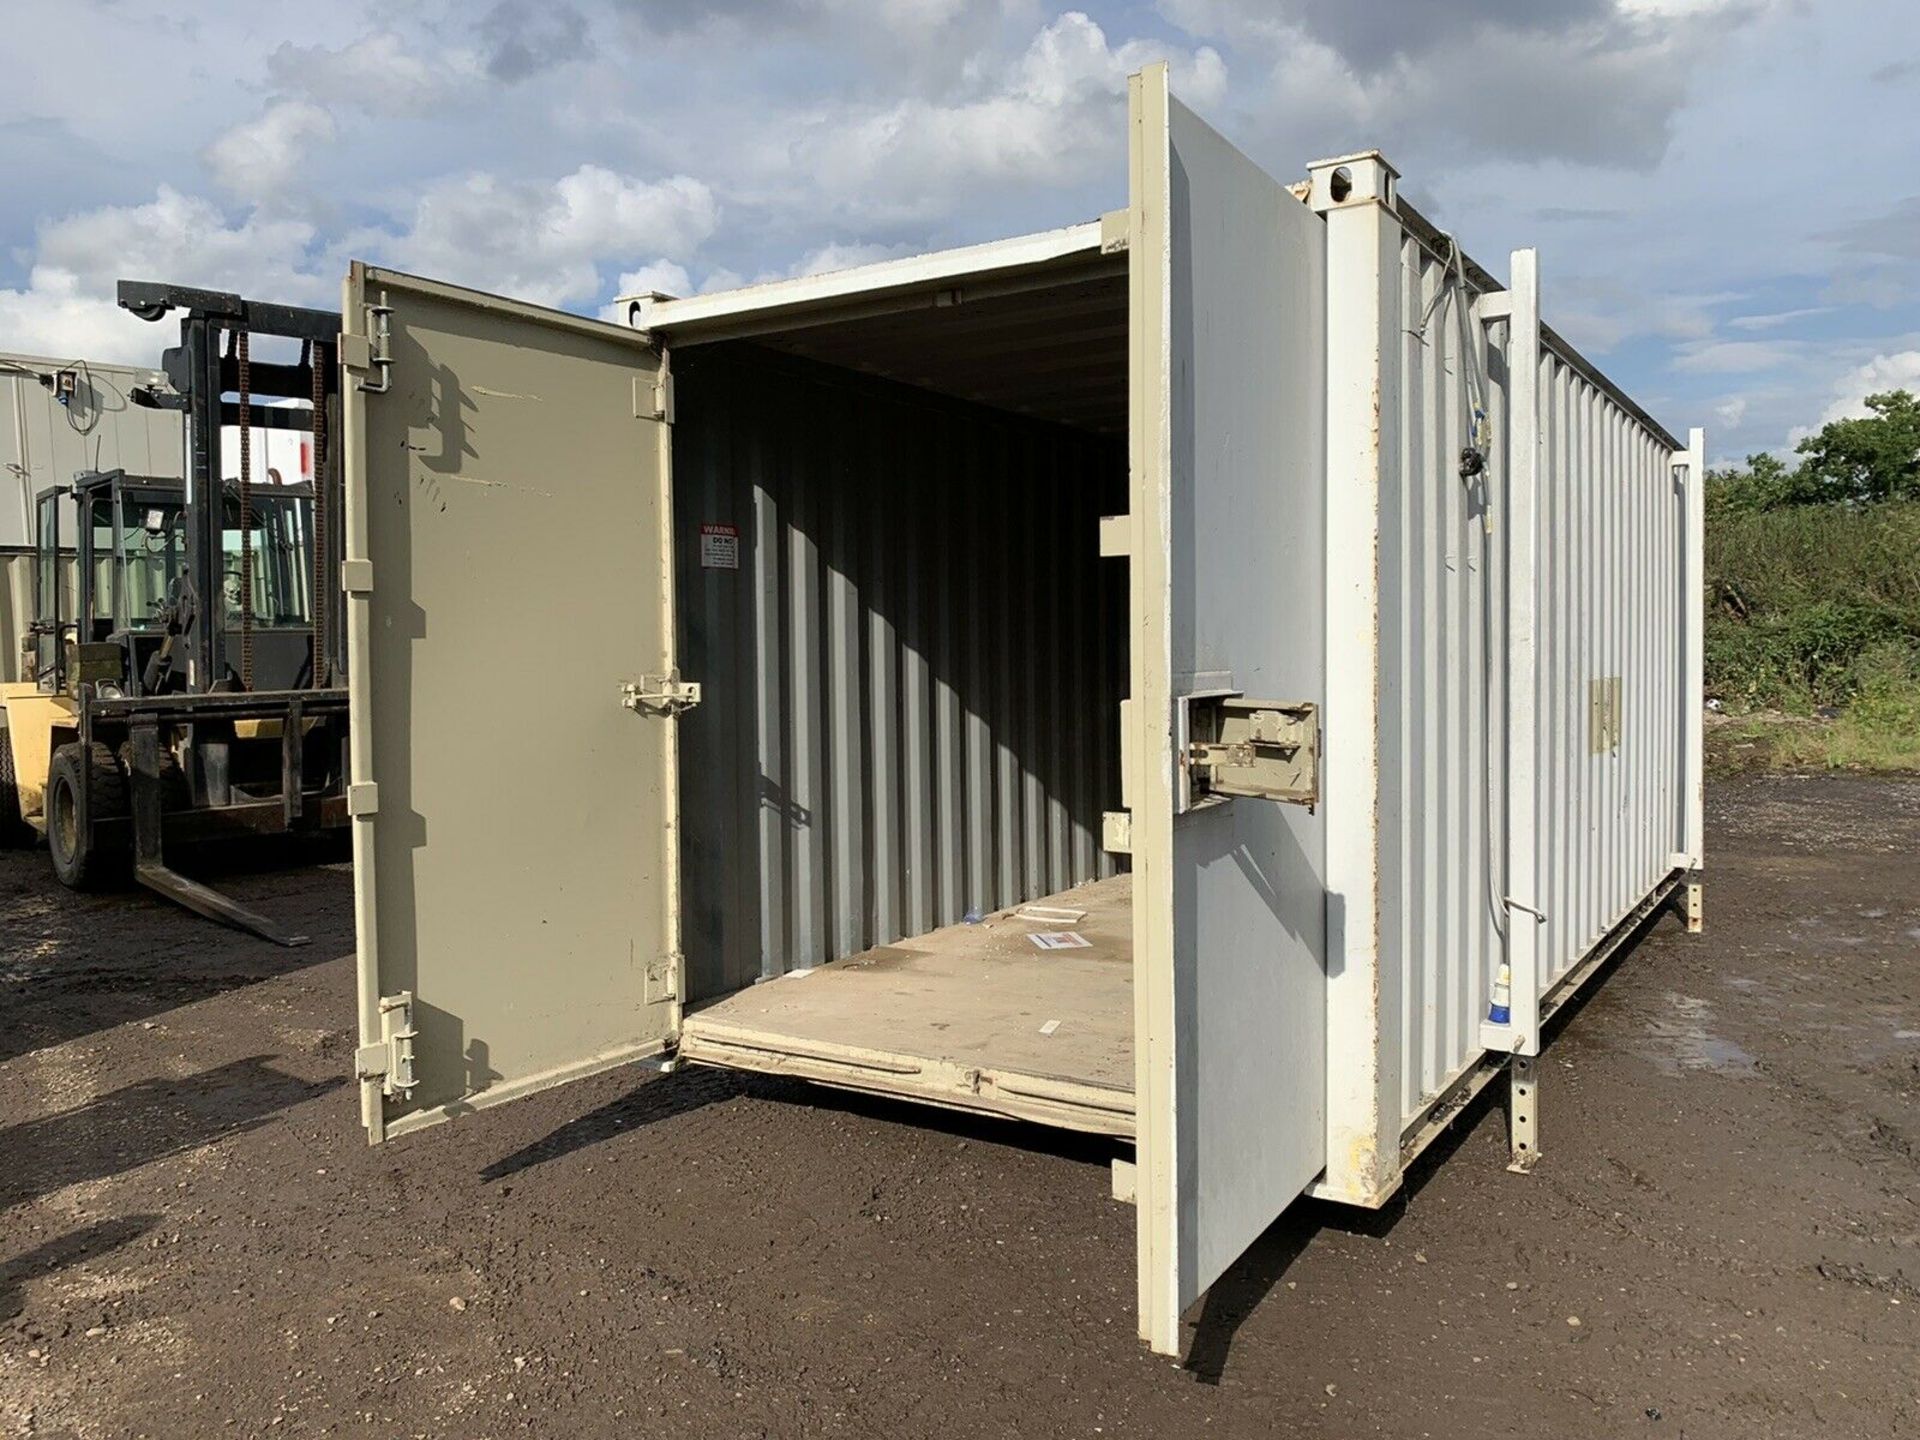 Anti Vandal Steel Portable Storage Container 20ft x 8ft - Image 6 of 10